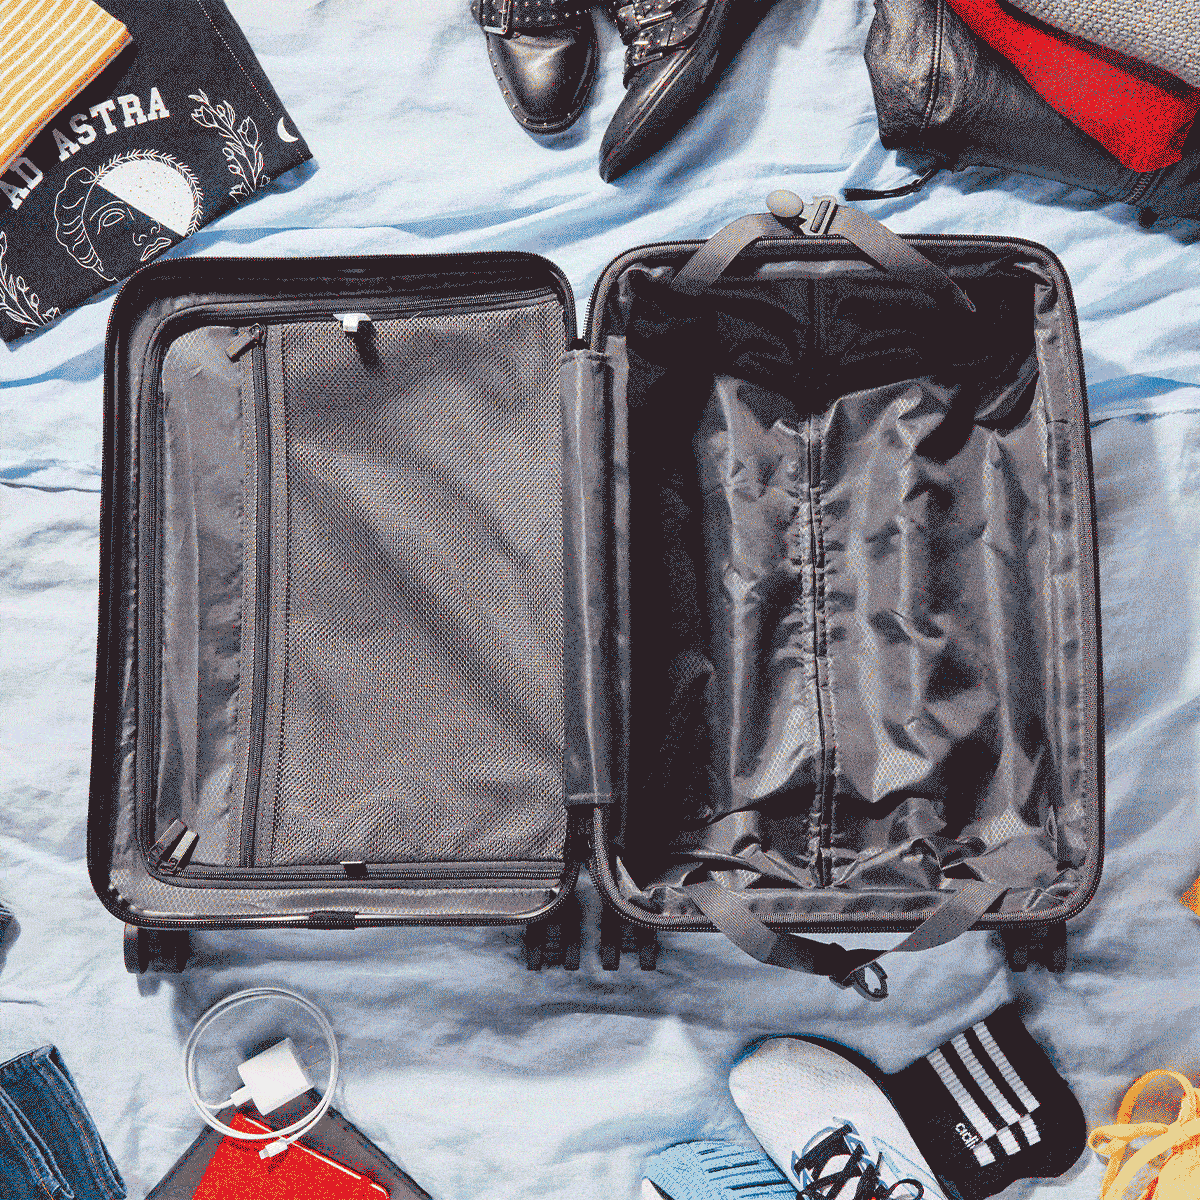 12 Proven Packing Tips That Will Help You Travel Smarter and Lighter